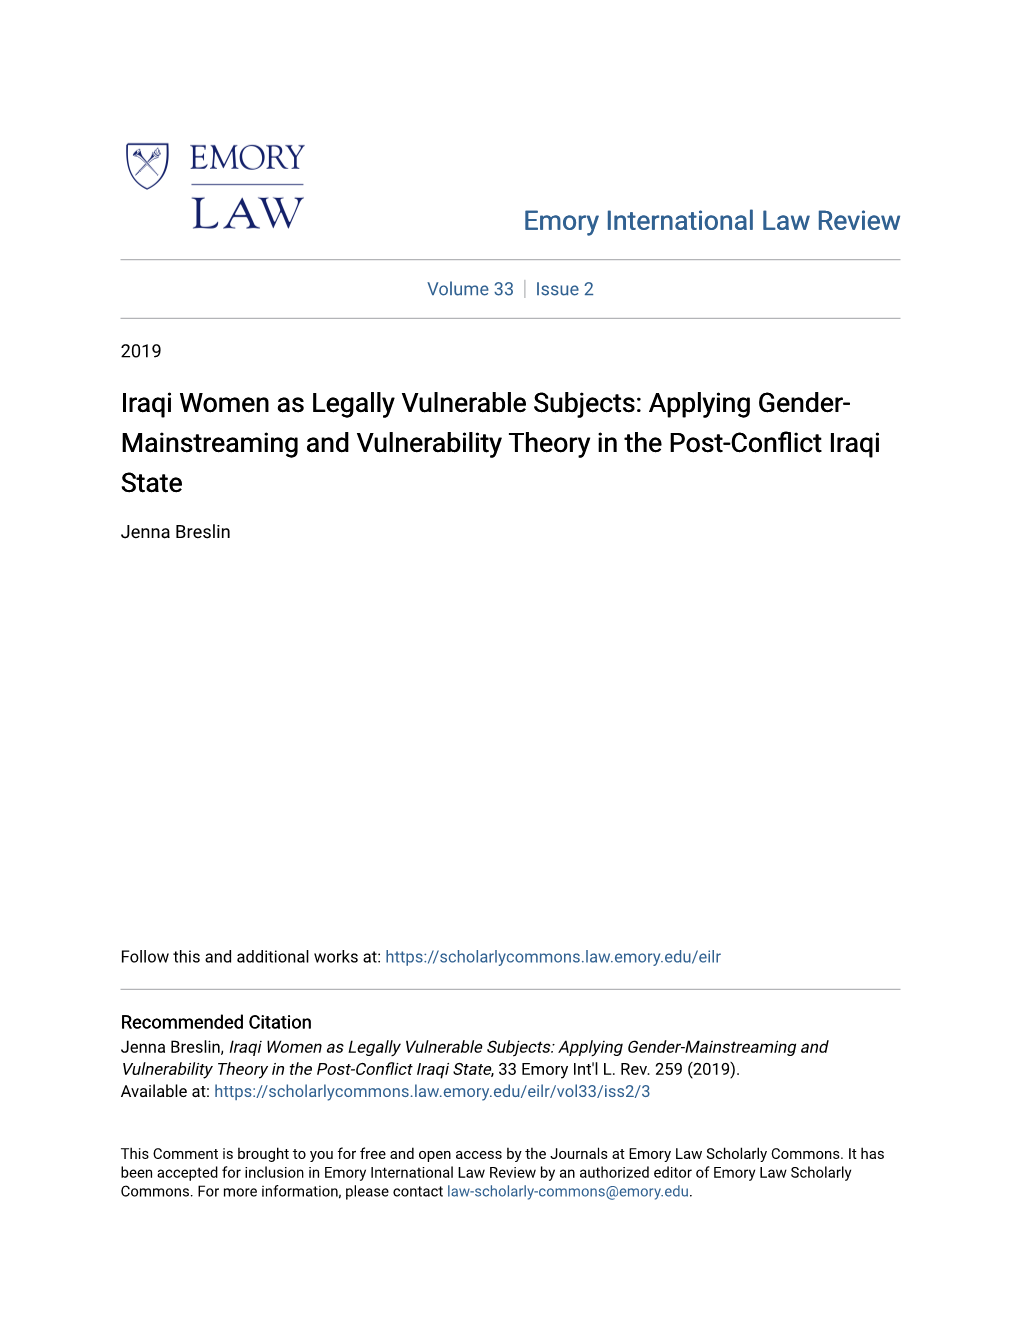 Iraqi Women As Legally Vulnerable Subjects: Applying Gender- Mainstreaming and Vulnerability Theory in the Post-Conflict Iraqi State